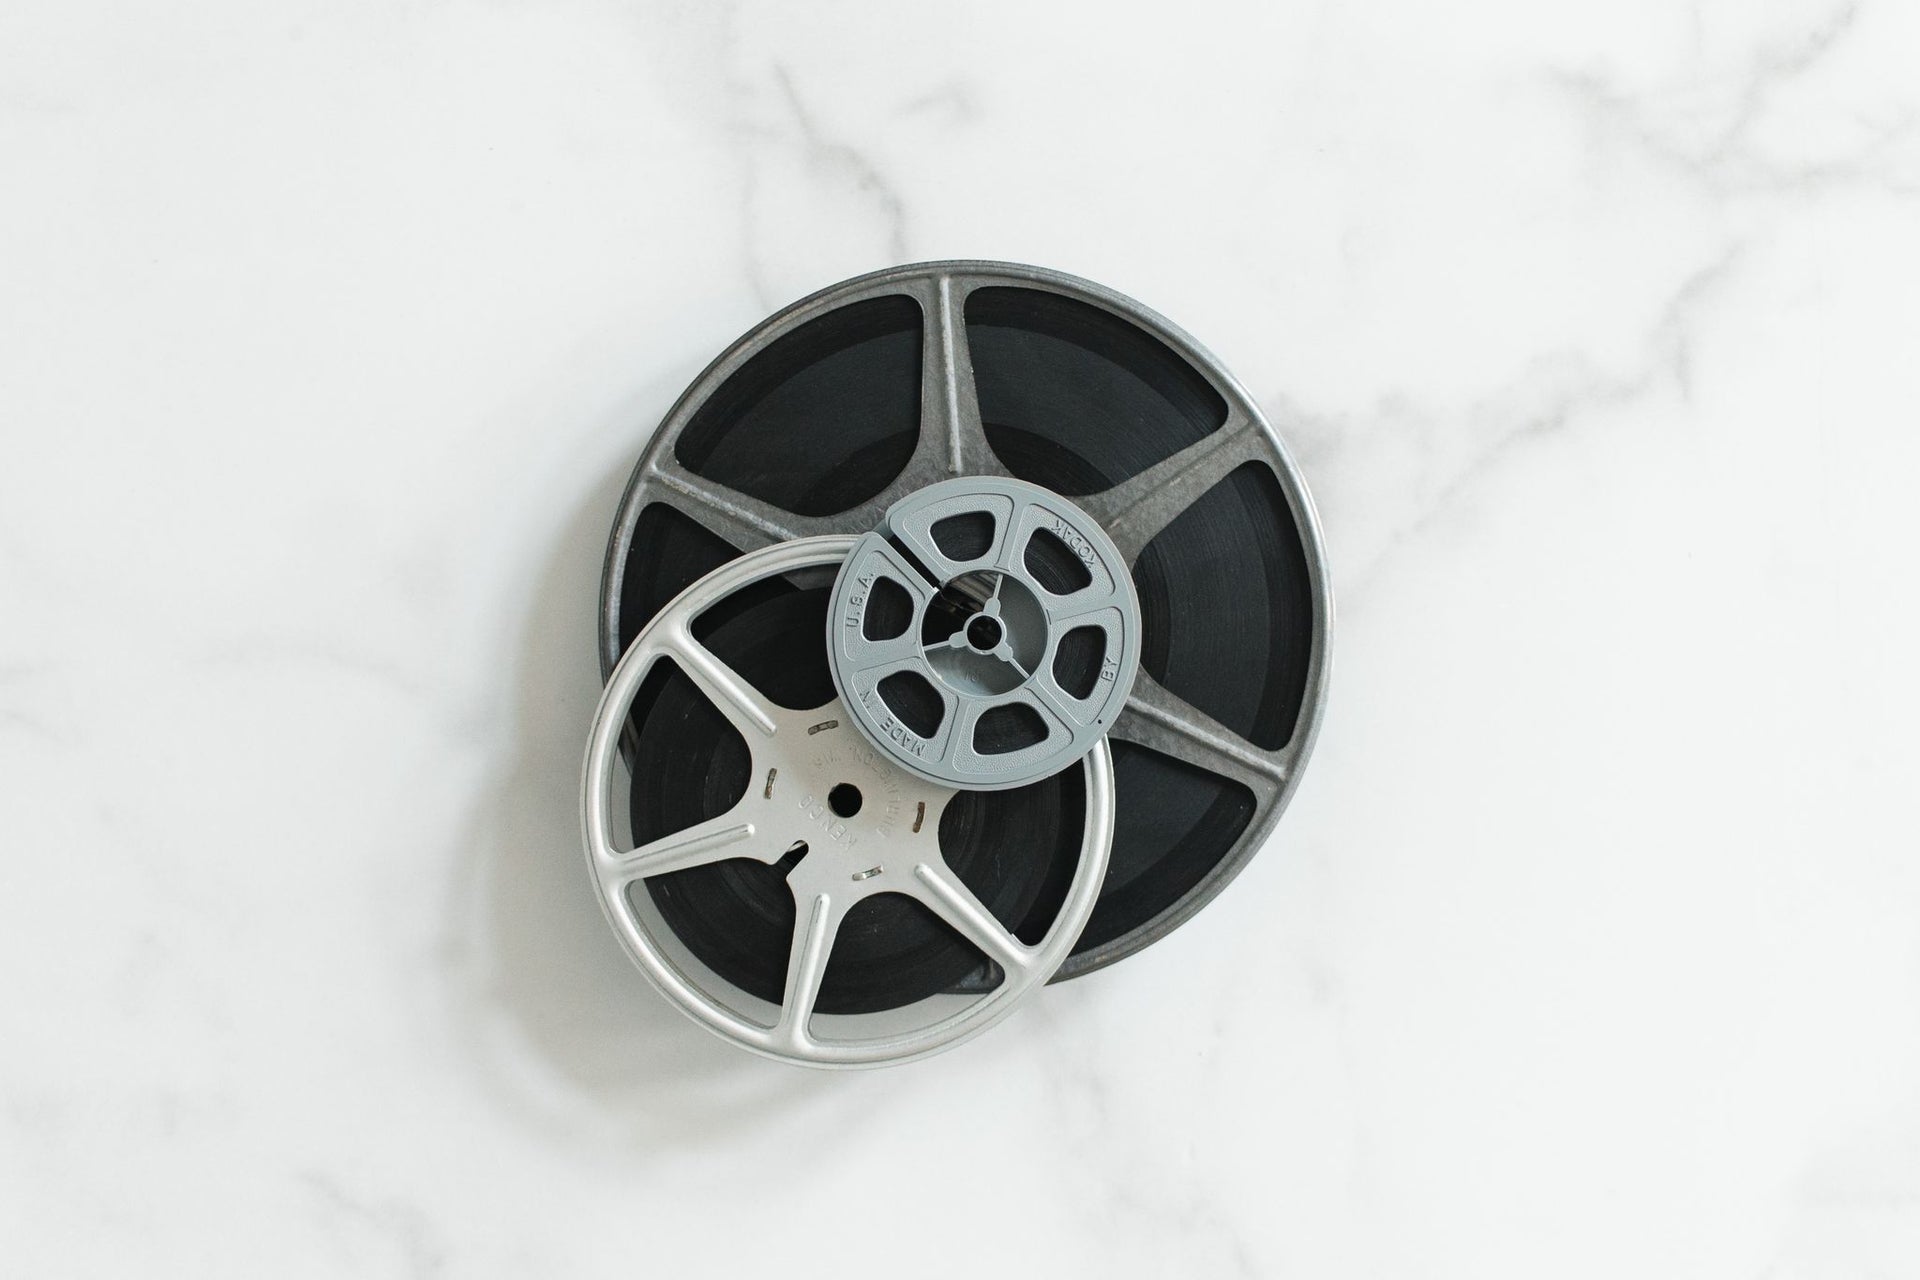 How Can I Tell if My Film Reels Are Damaged?